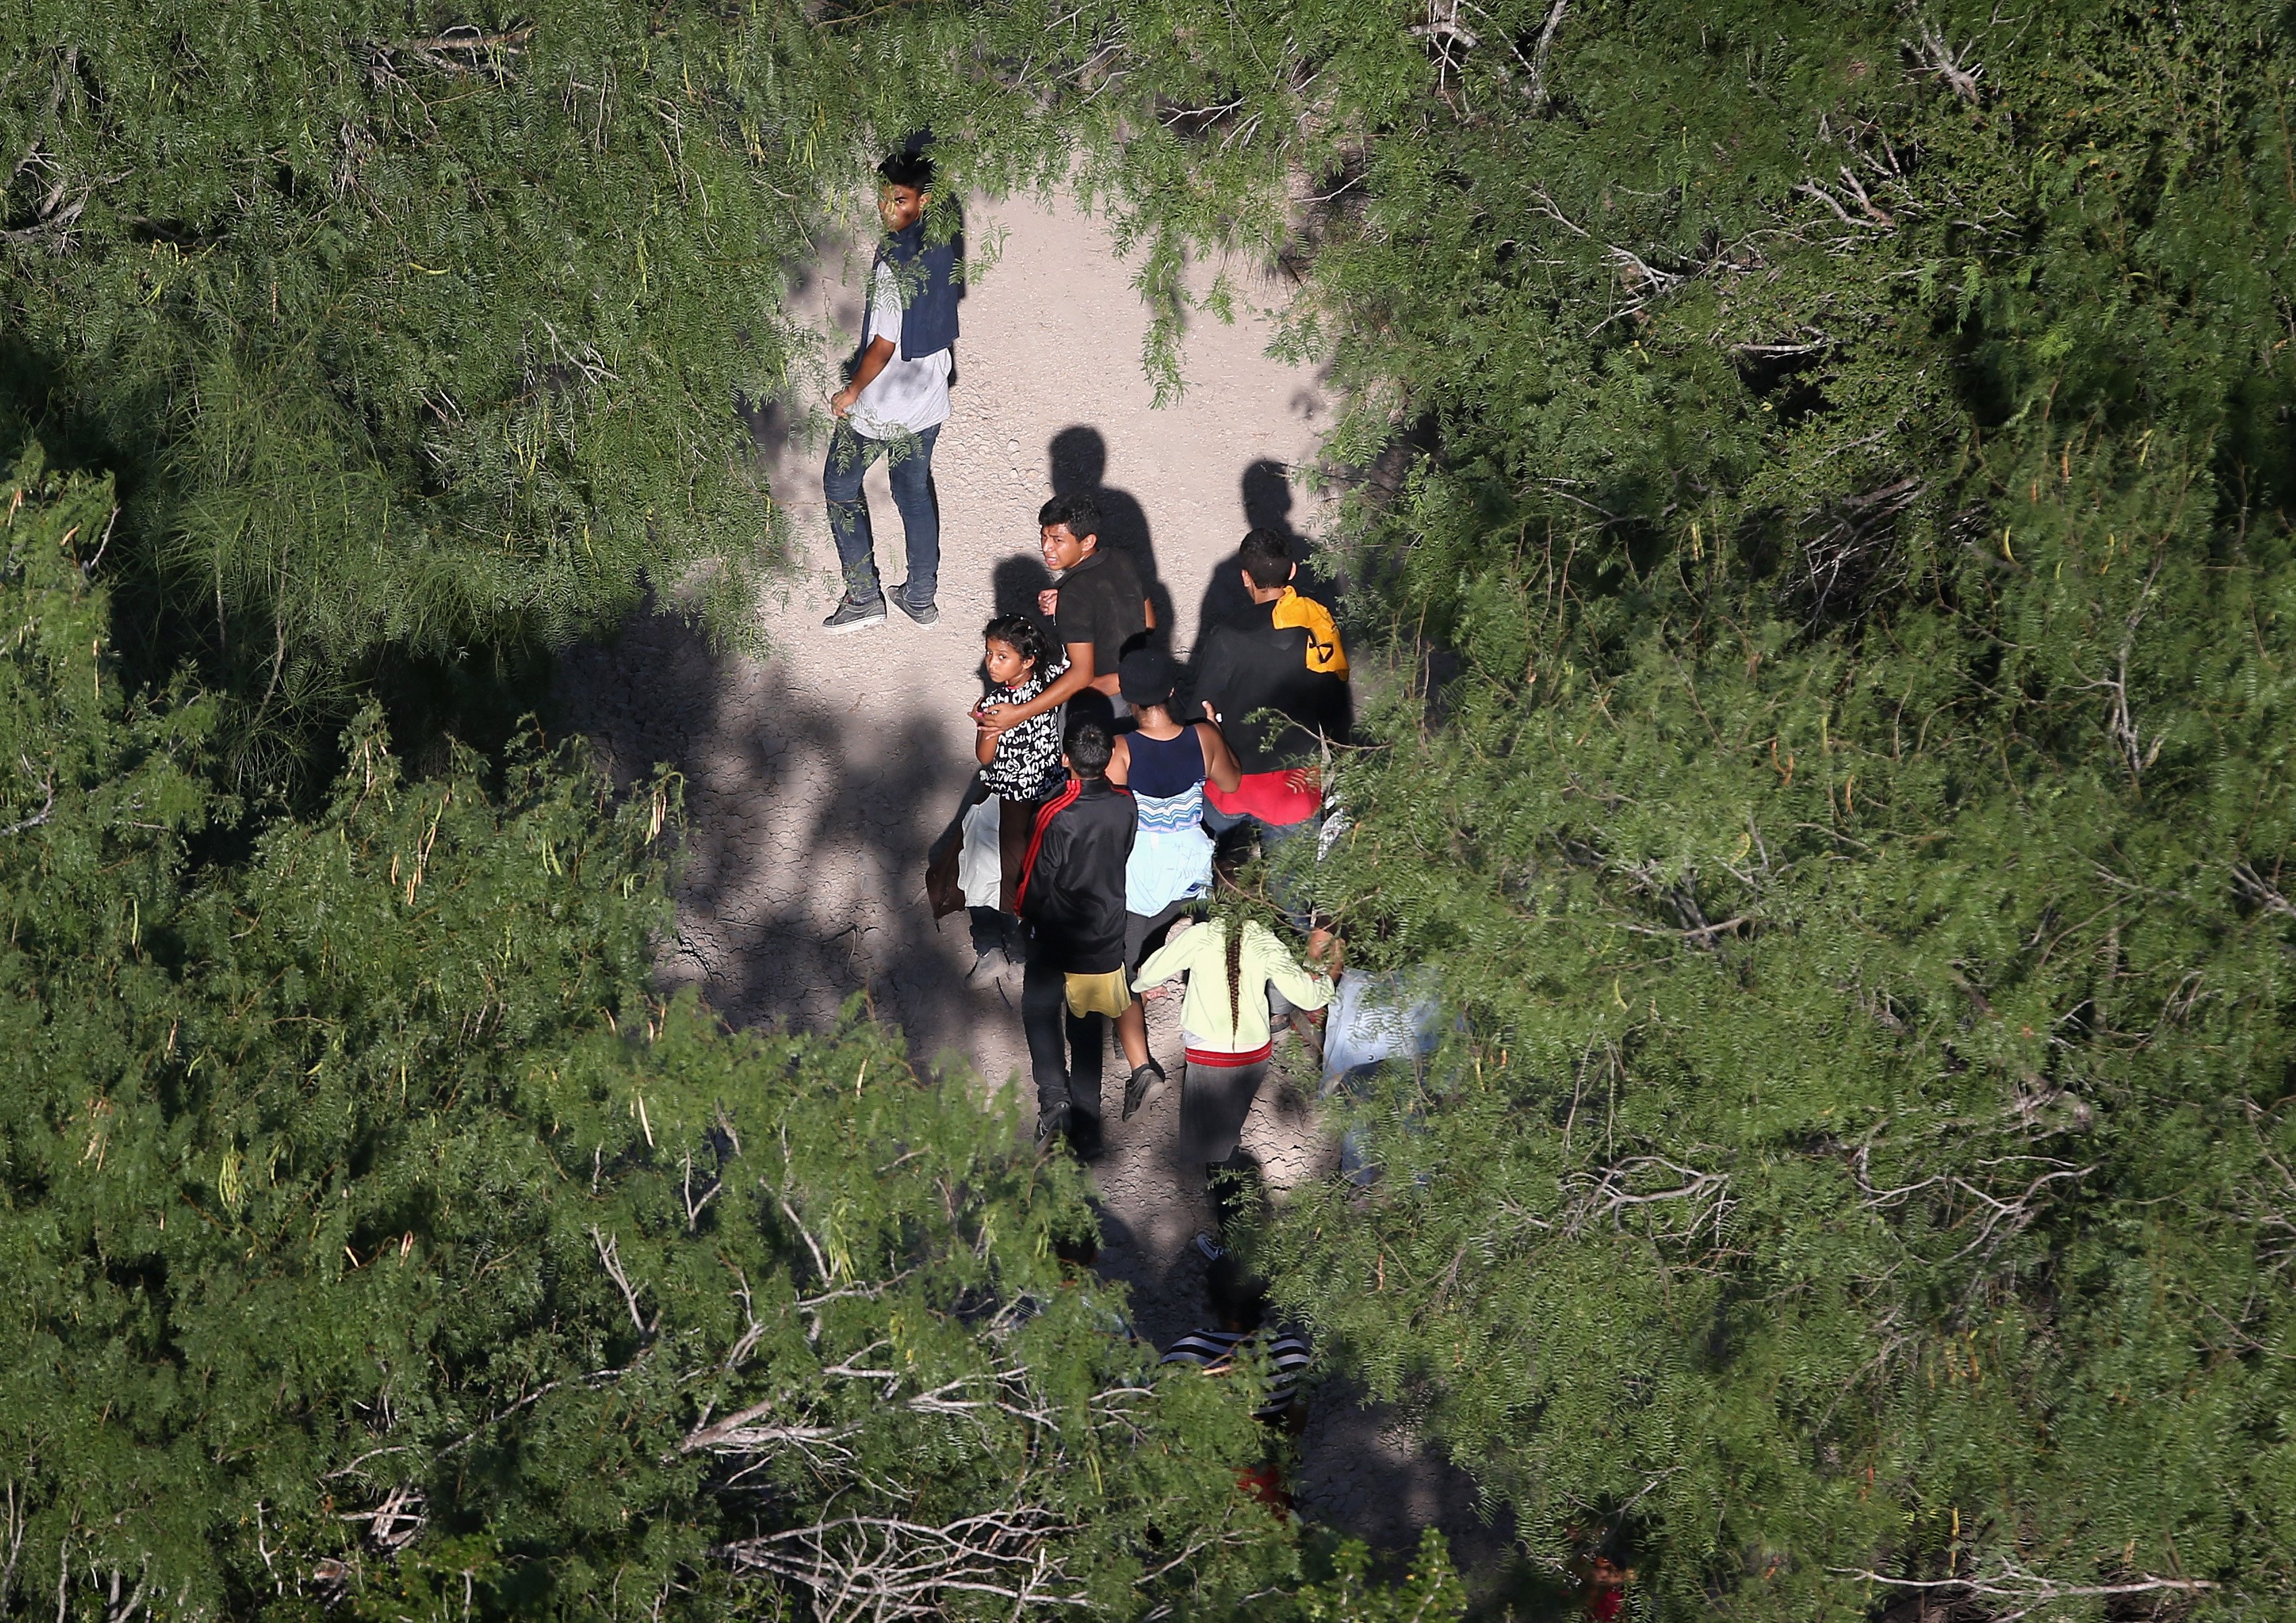 Undocumented immigrant families walk before being taken into custody by Border Patrol agents near McAllen, Texas on July 21, 2014.